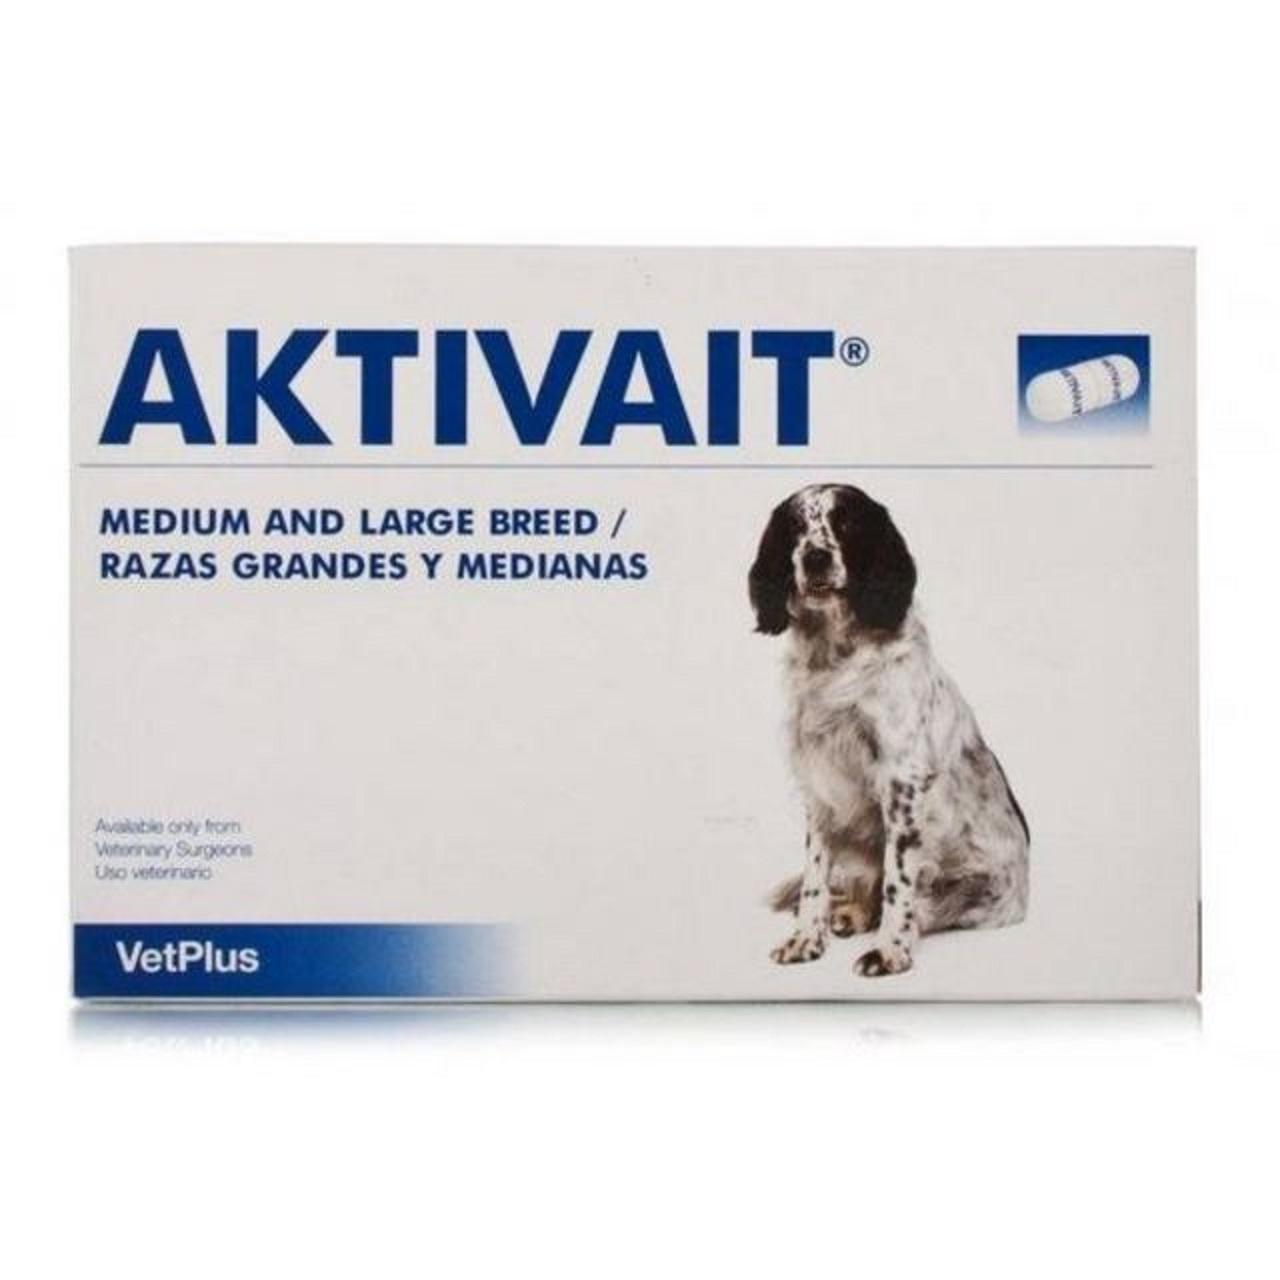 An image of Aktivait Capsules for Medium & Large Breed Dogs